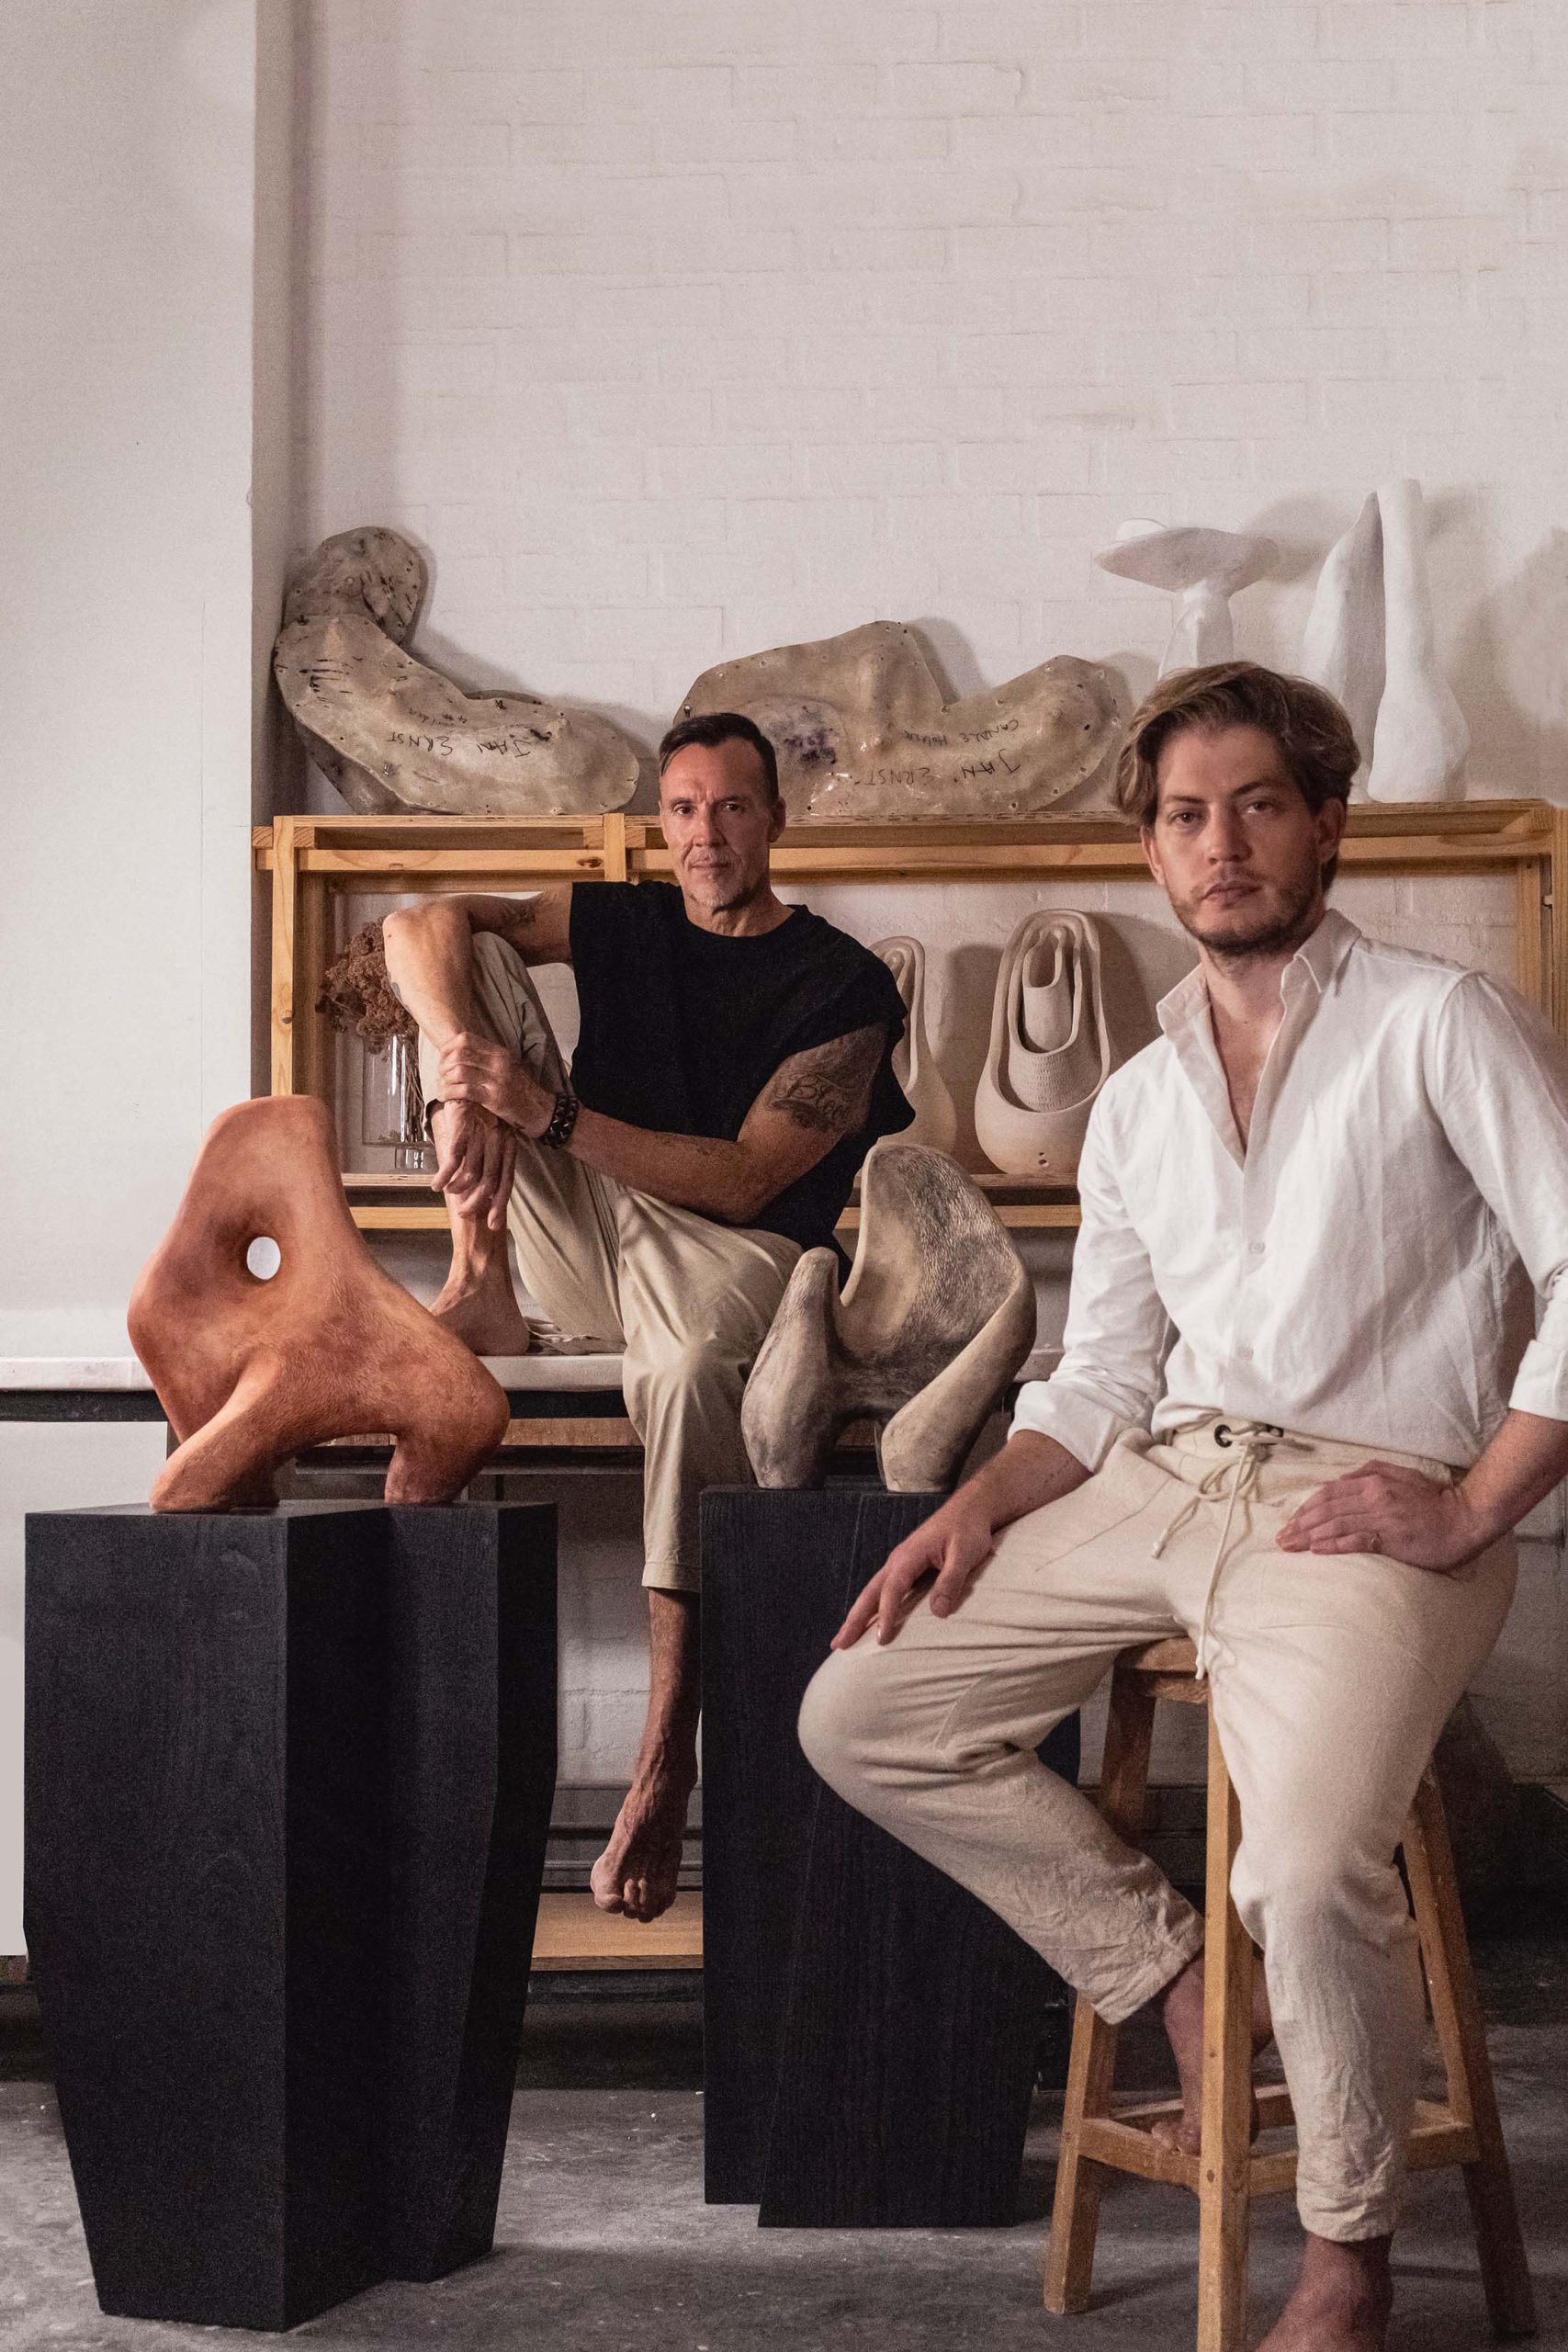 Adam Court and Jan Ernst, captured in a candid moment, are surrounded by their art pieces in a studio setting. Adam leans back on a stool, embodying confidence and creativity, while Jan, seated on a wooden bench, gazes thoughtfully ahead. The background is adorned with a variety of sculptures, illustrating the rich tapestry of talent at OKHA's Cape Town Exhibition, where design and artistry converge.